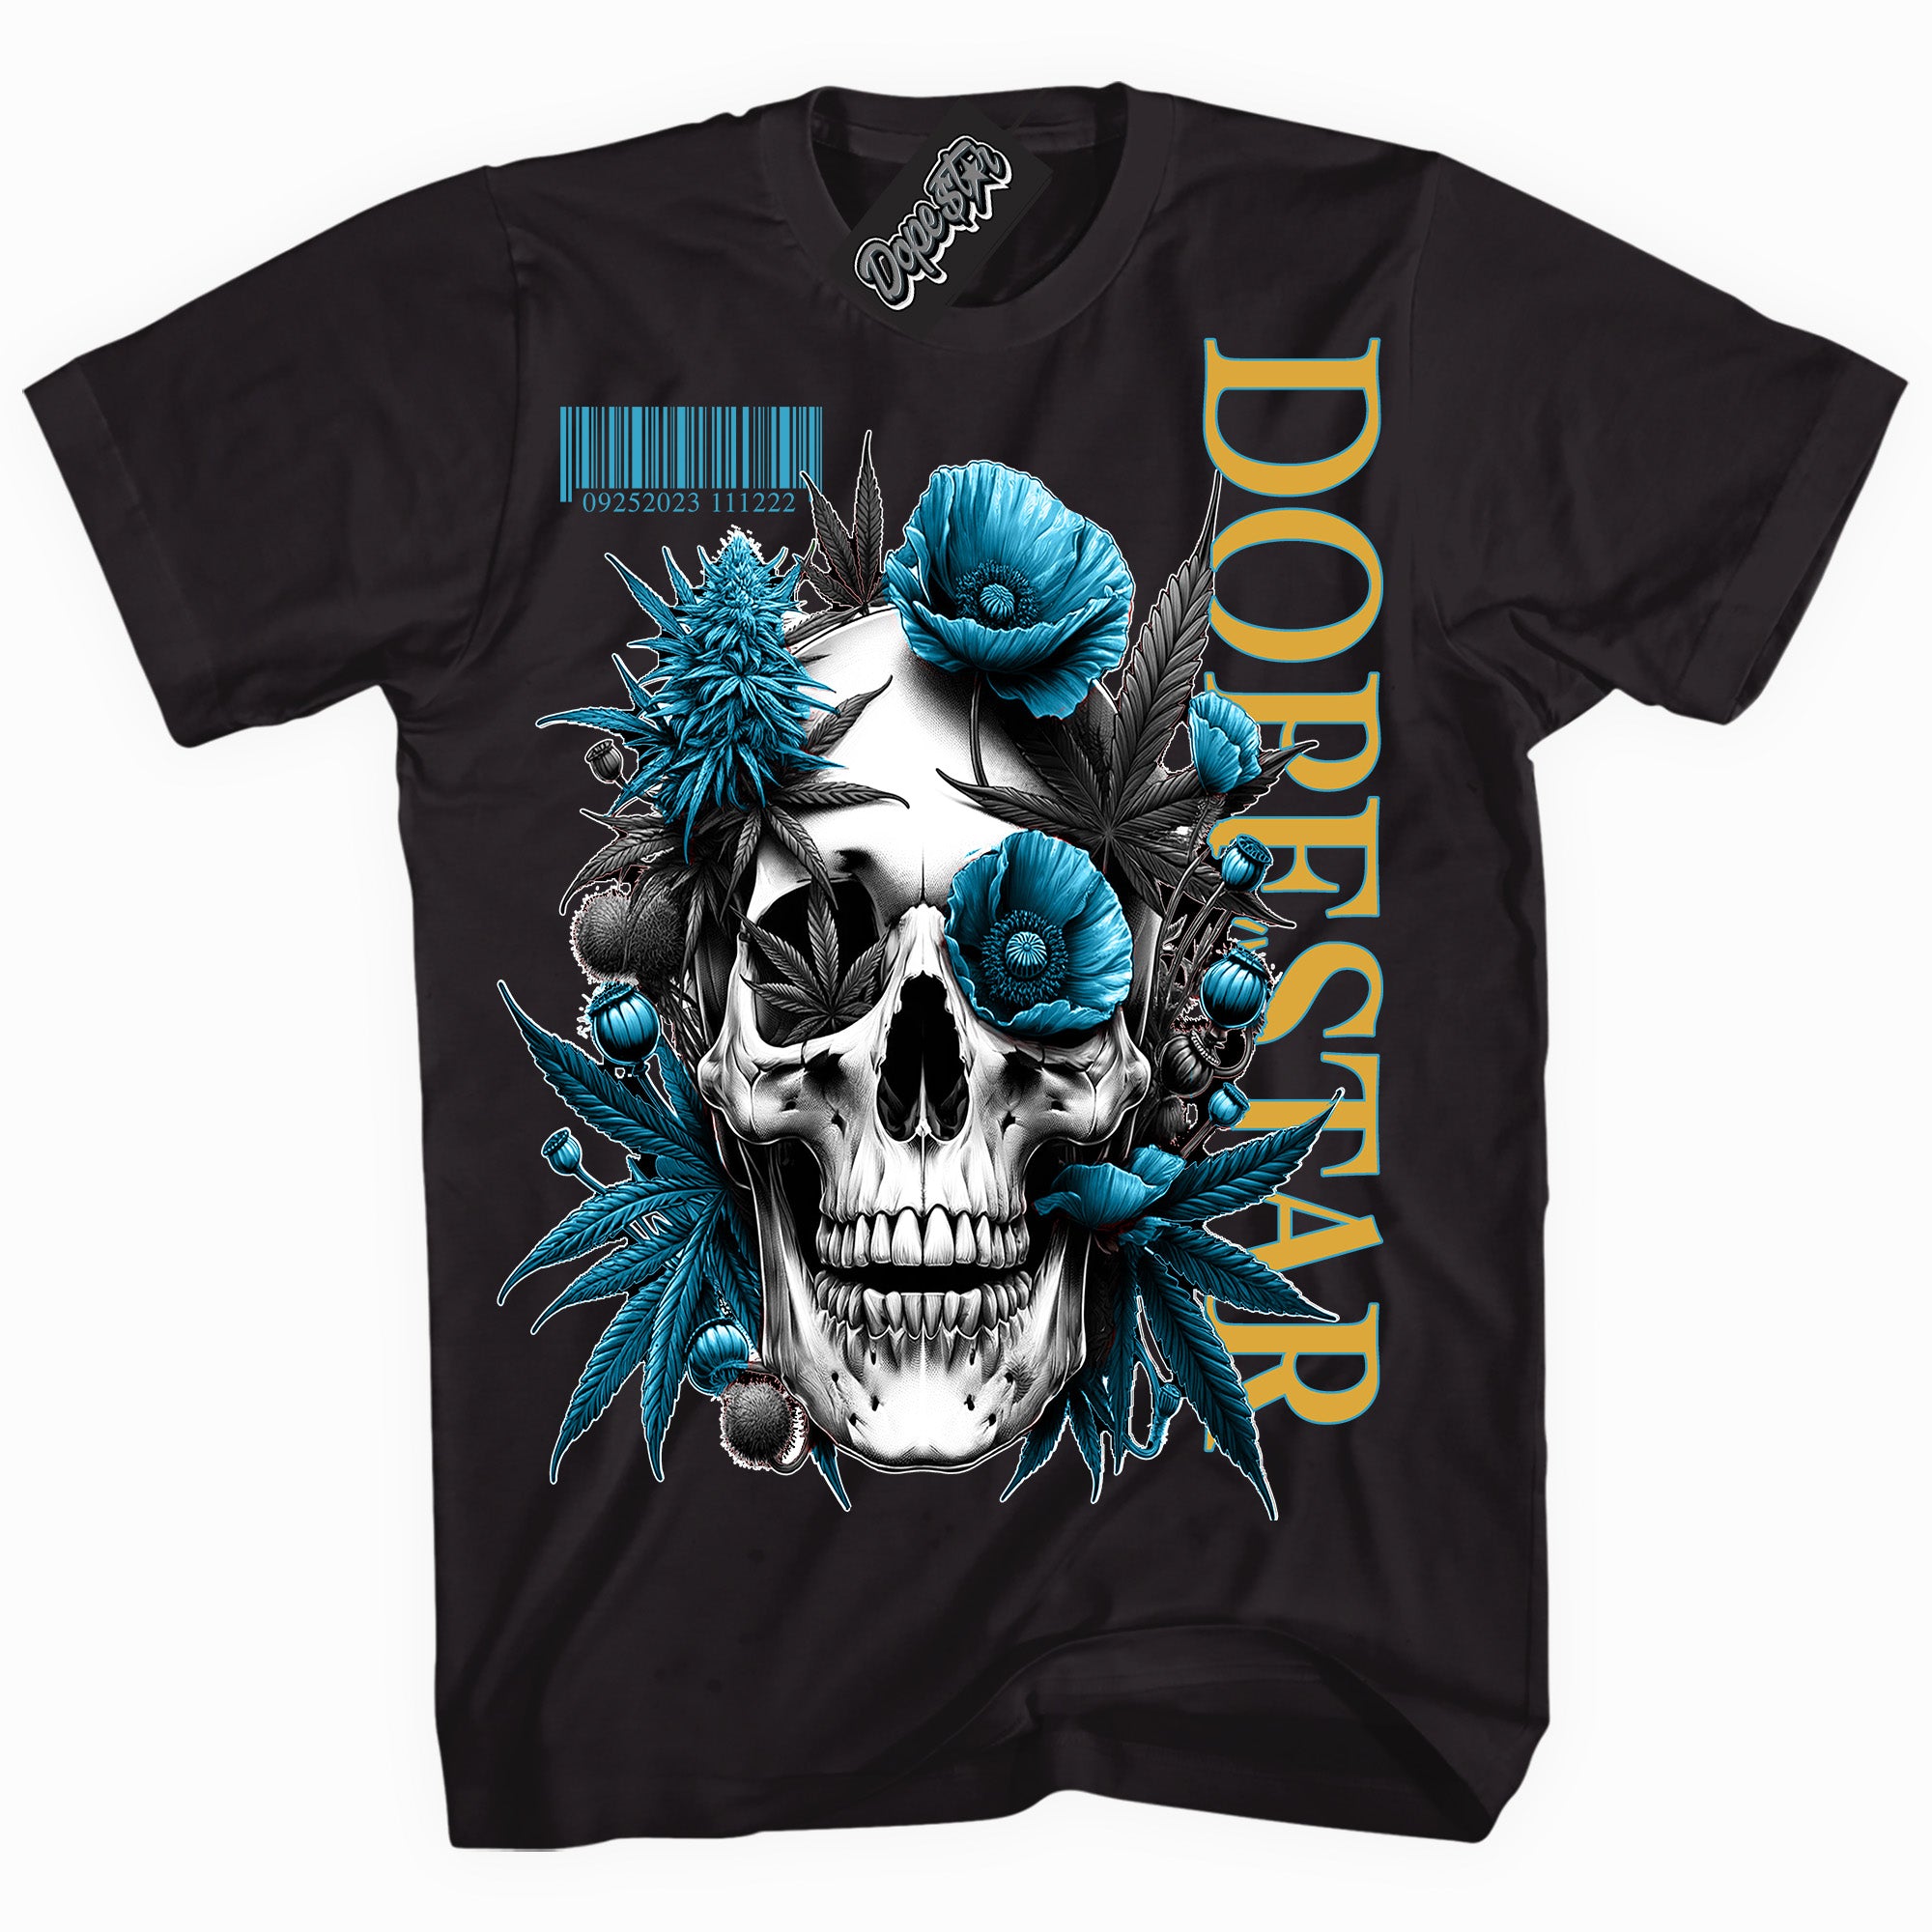 Cool Black graphic tee with “ Skull Poppies ” print, that perfectly matches AQUA 5s sneakers 